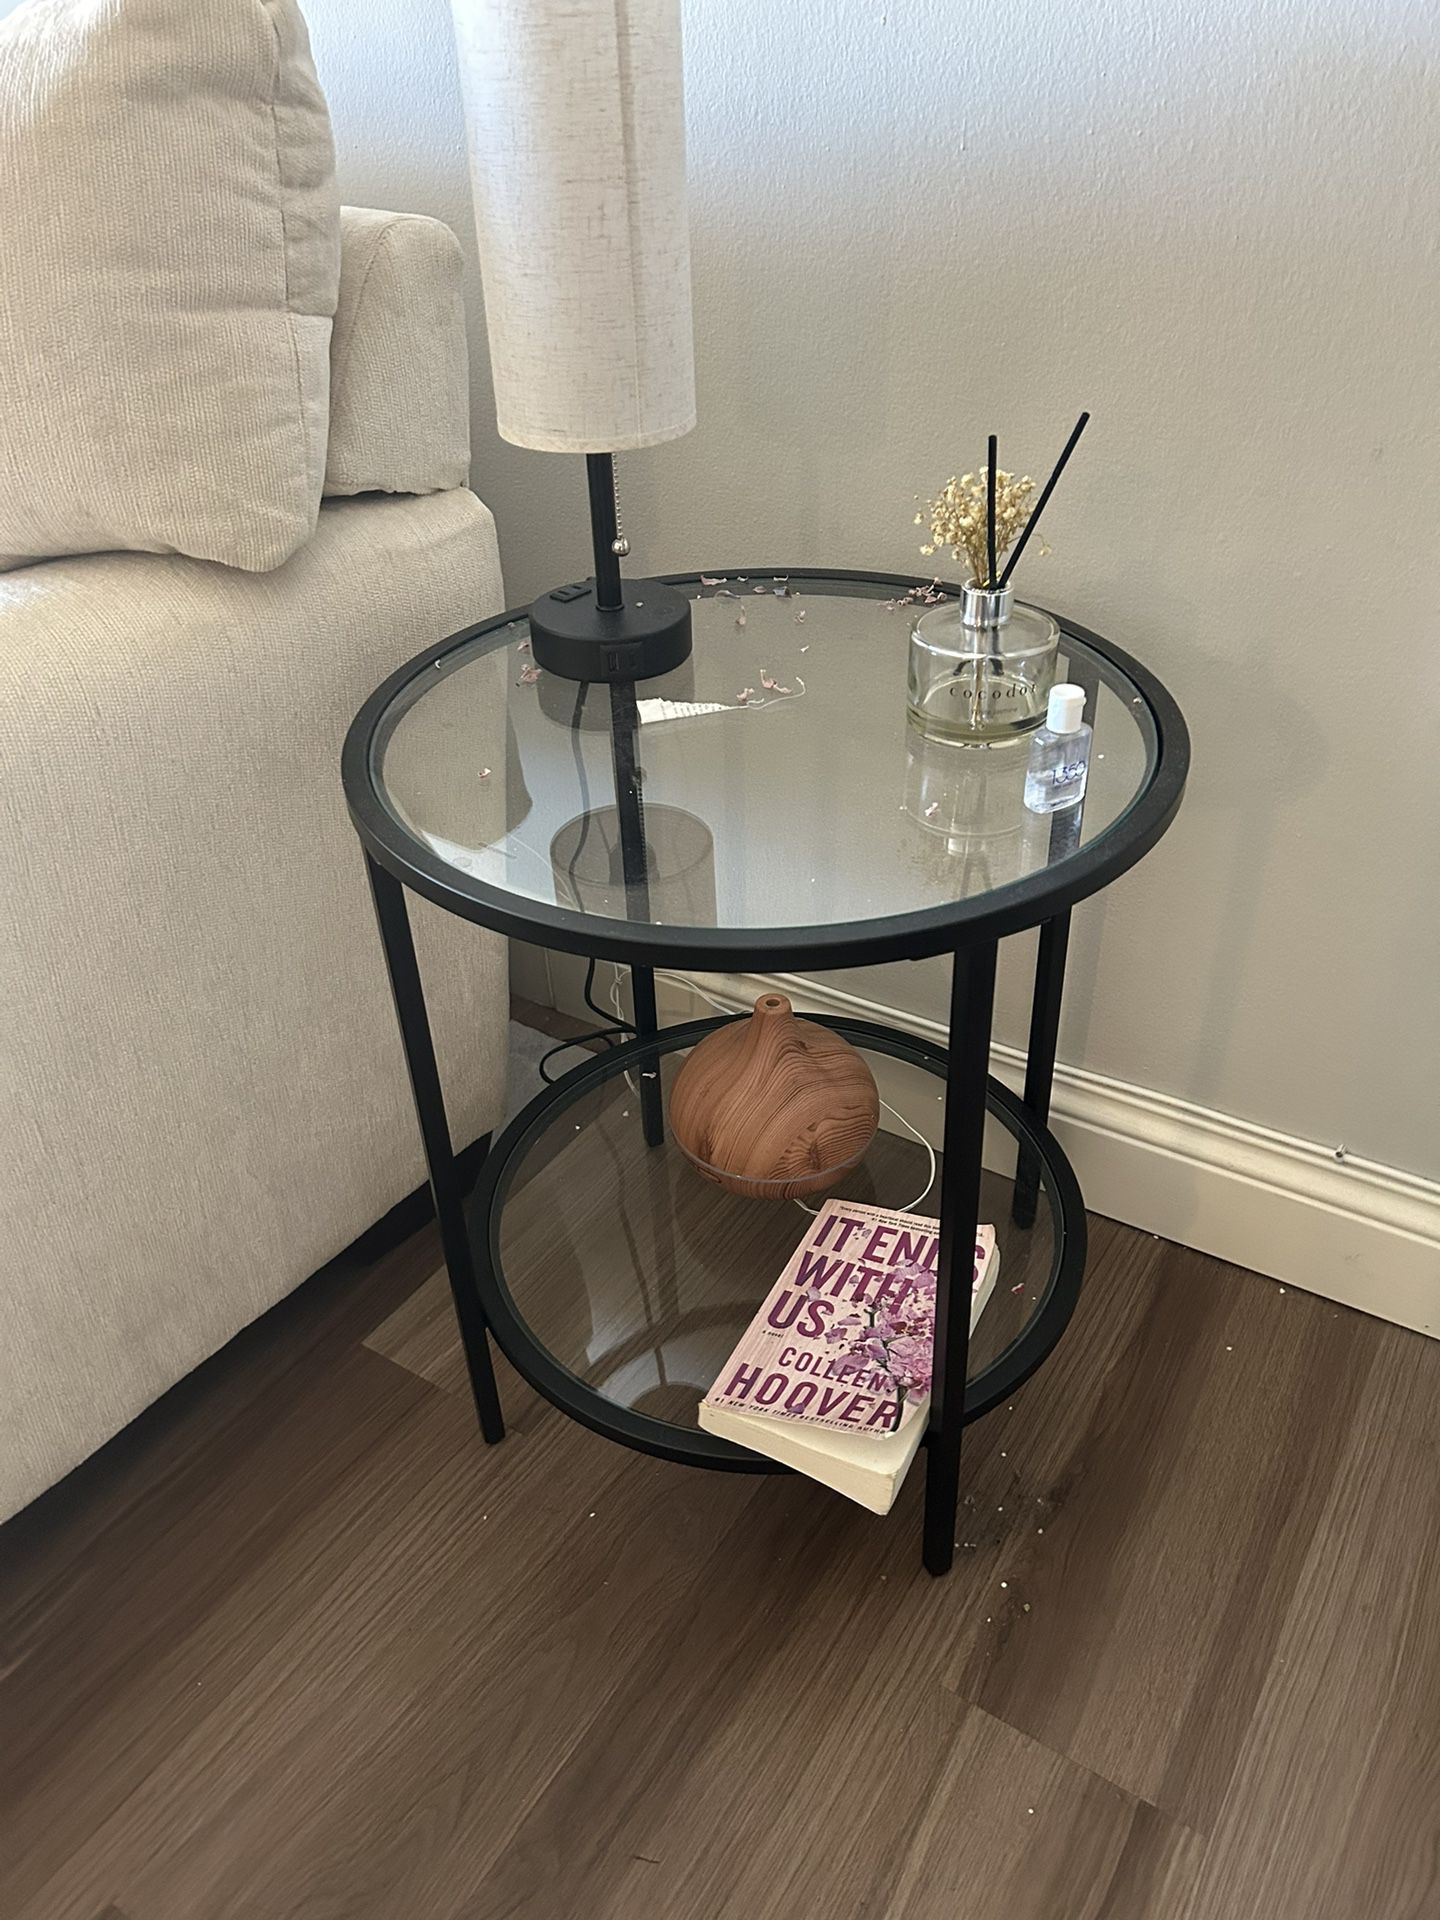 20 Inch Round Glass Side Table $25